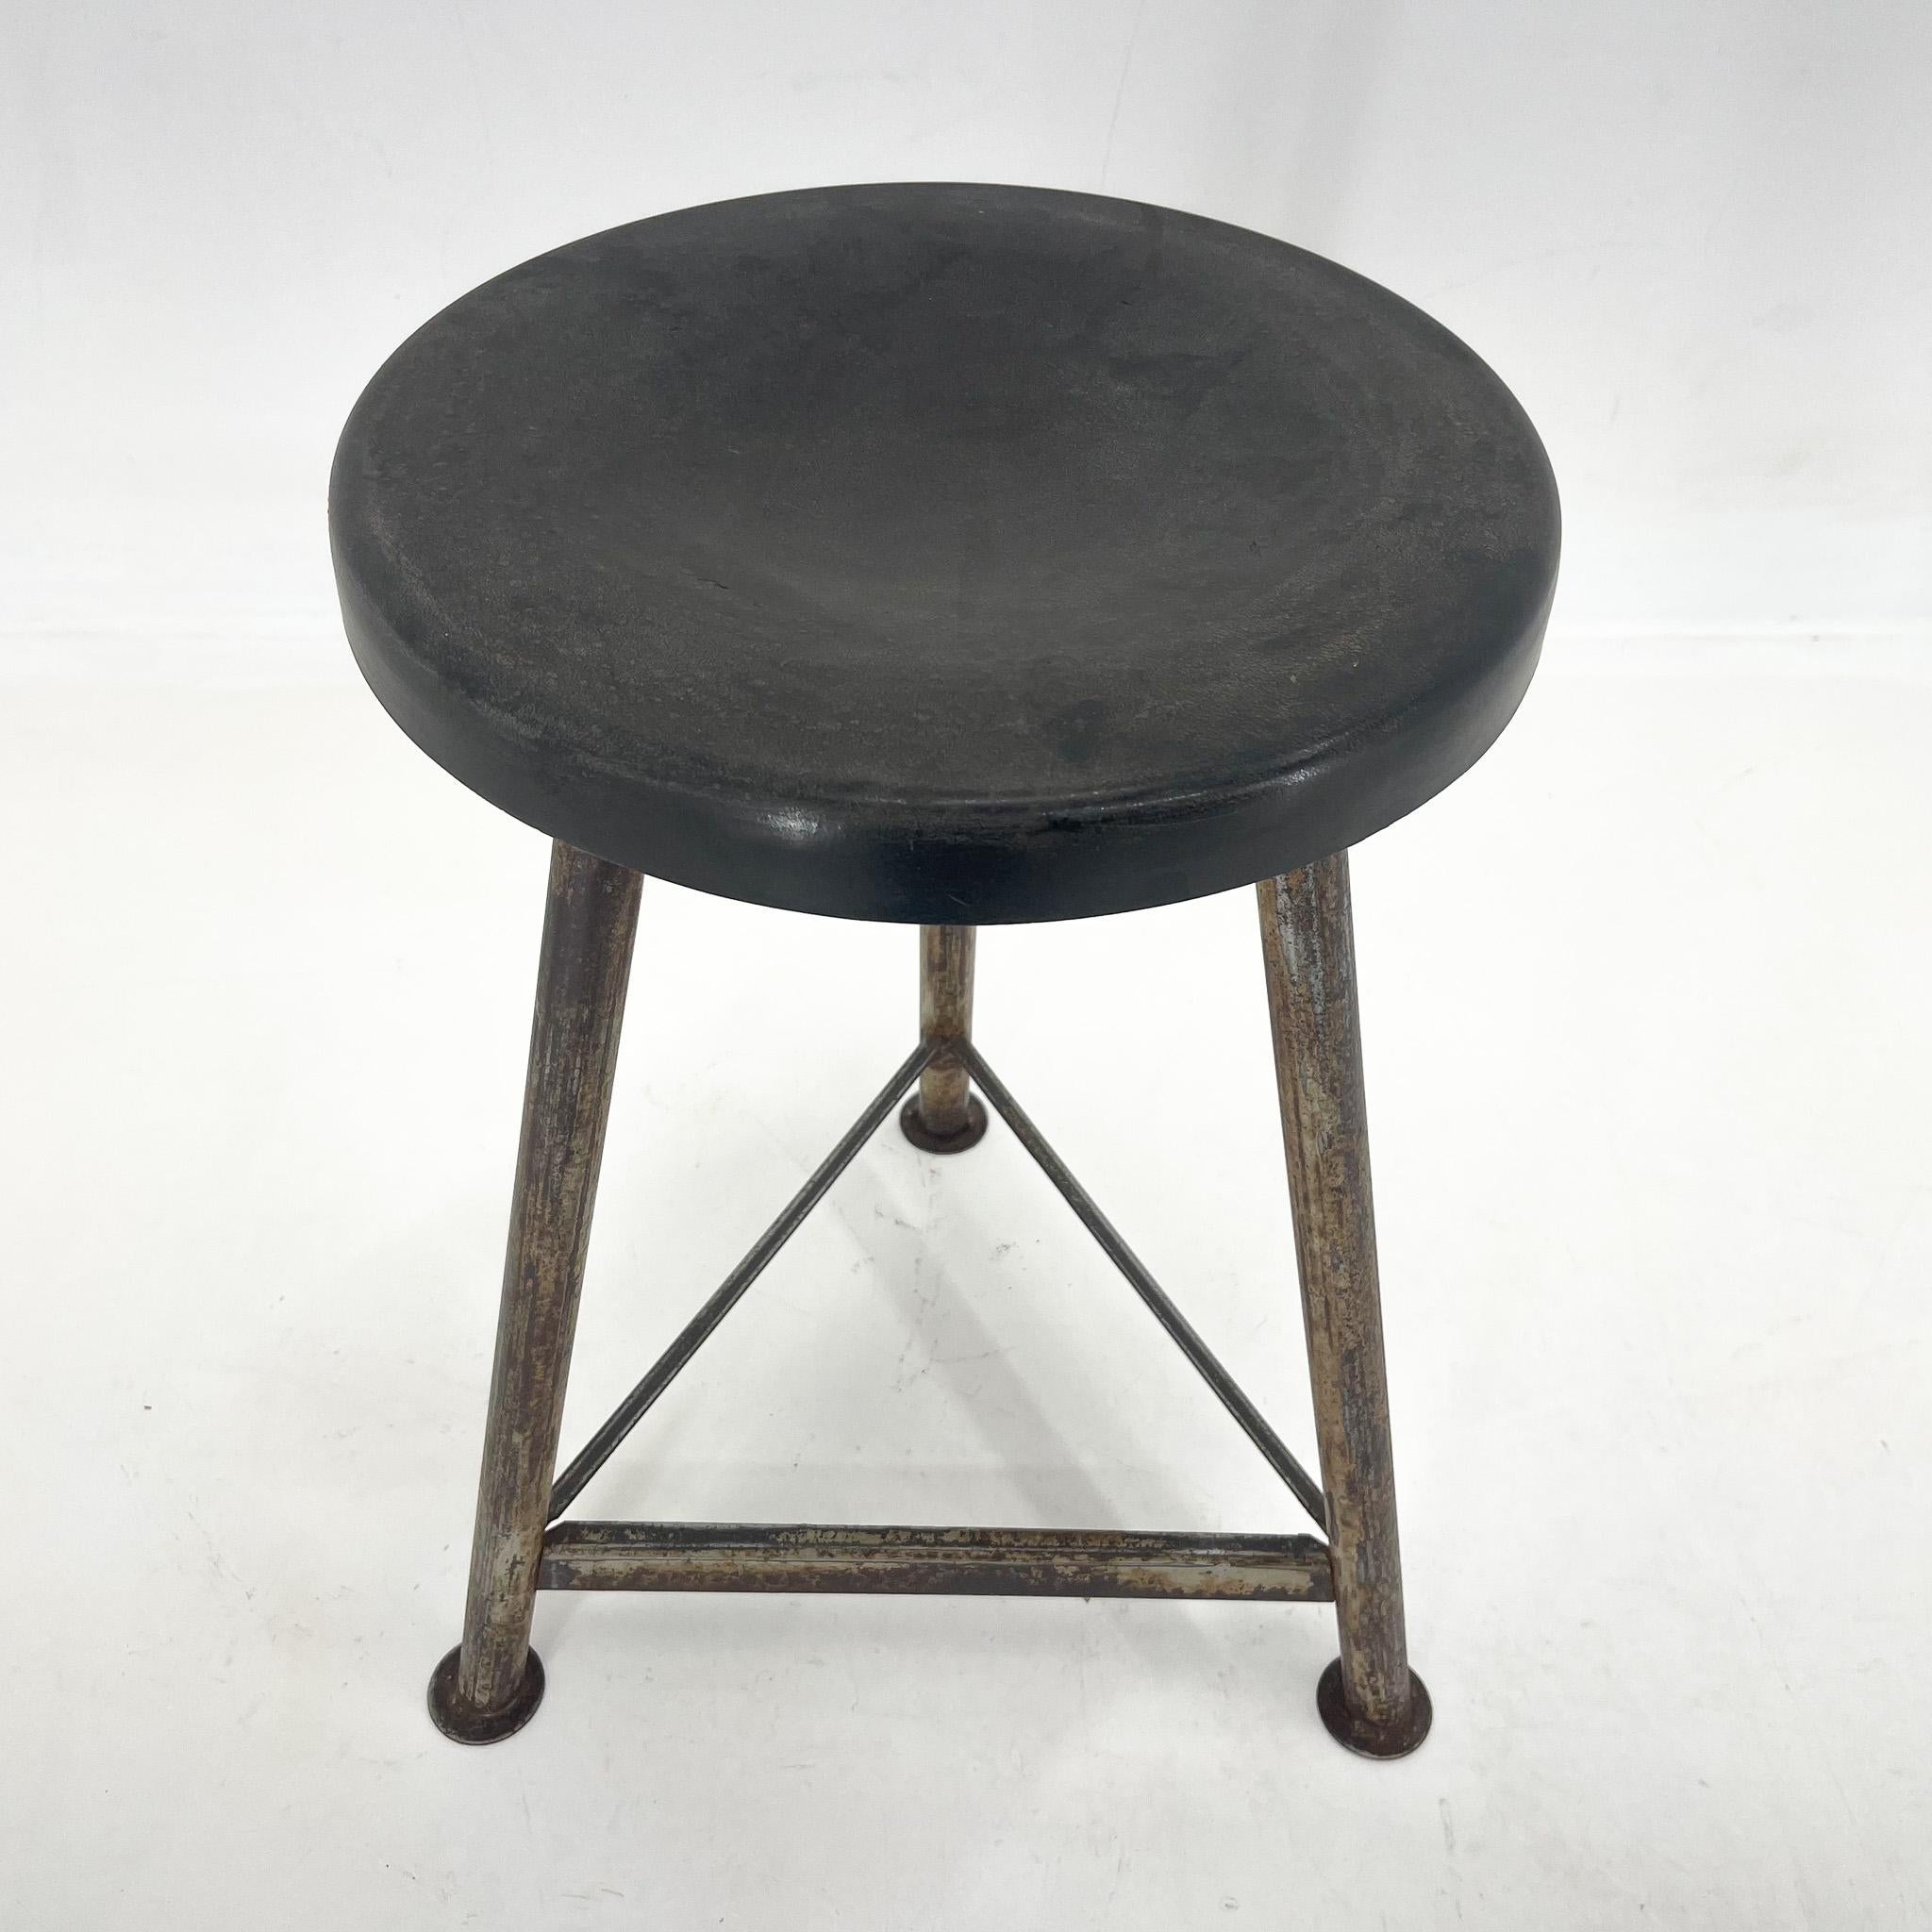 Vintage Industrial Iron Tripod Stool with Original Plastic Seat, 1950s For Sale 3